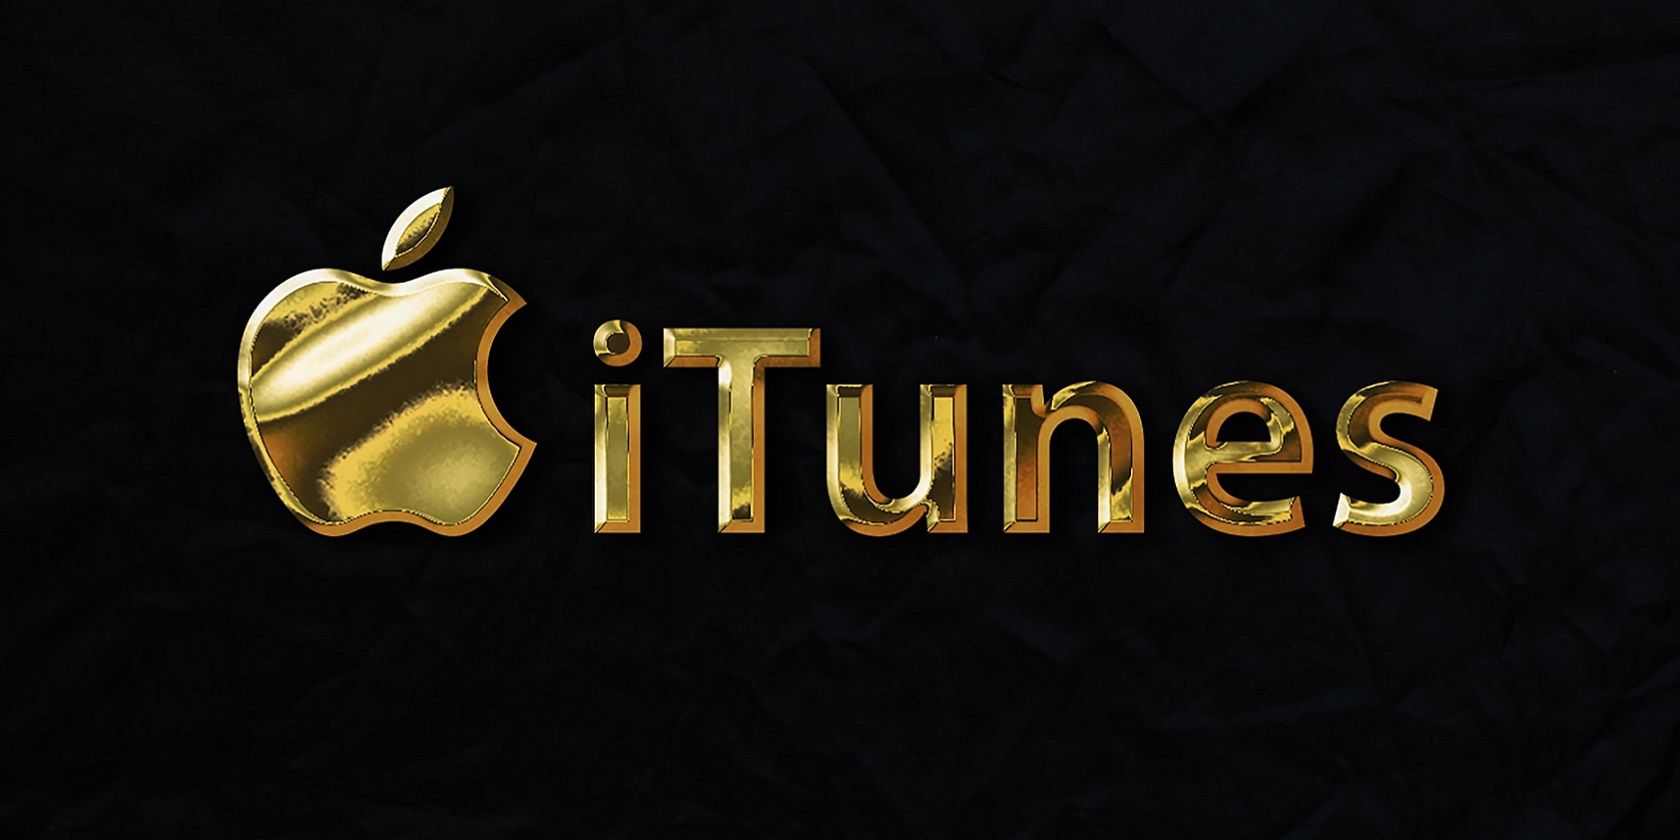 The Apple logo and iTunes text